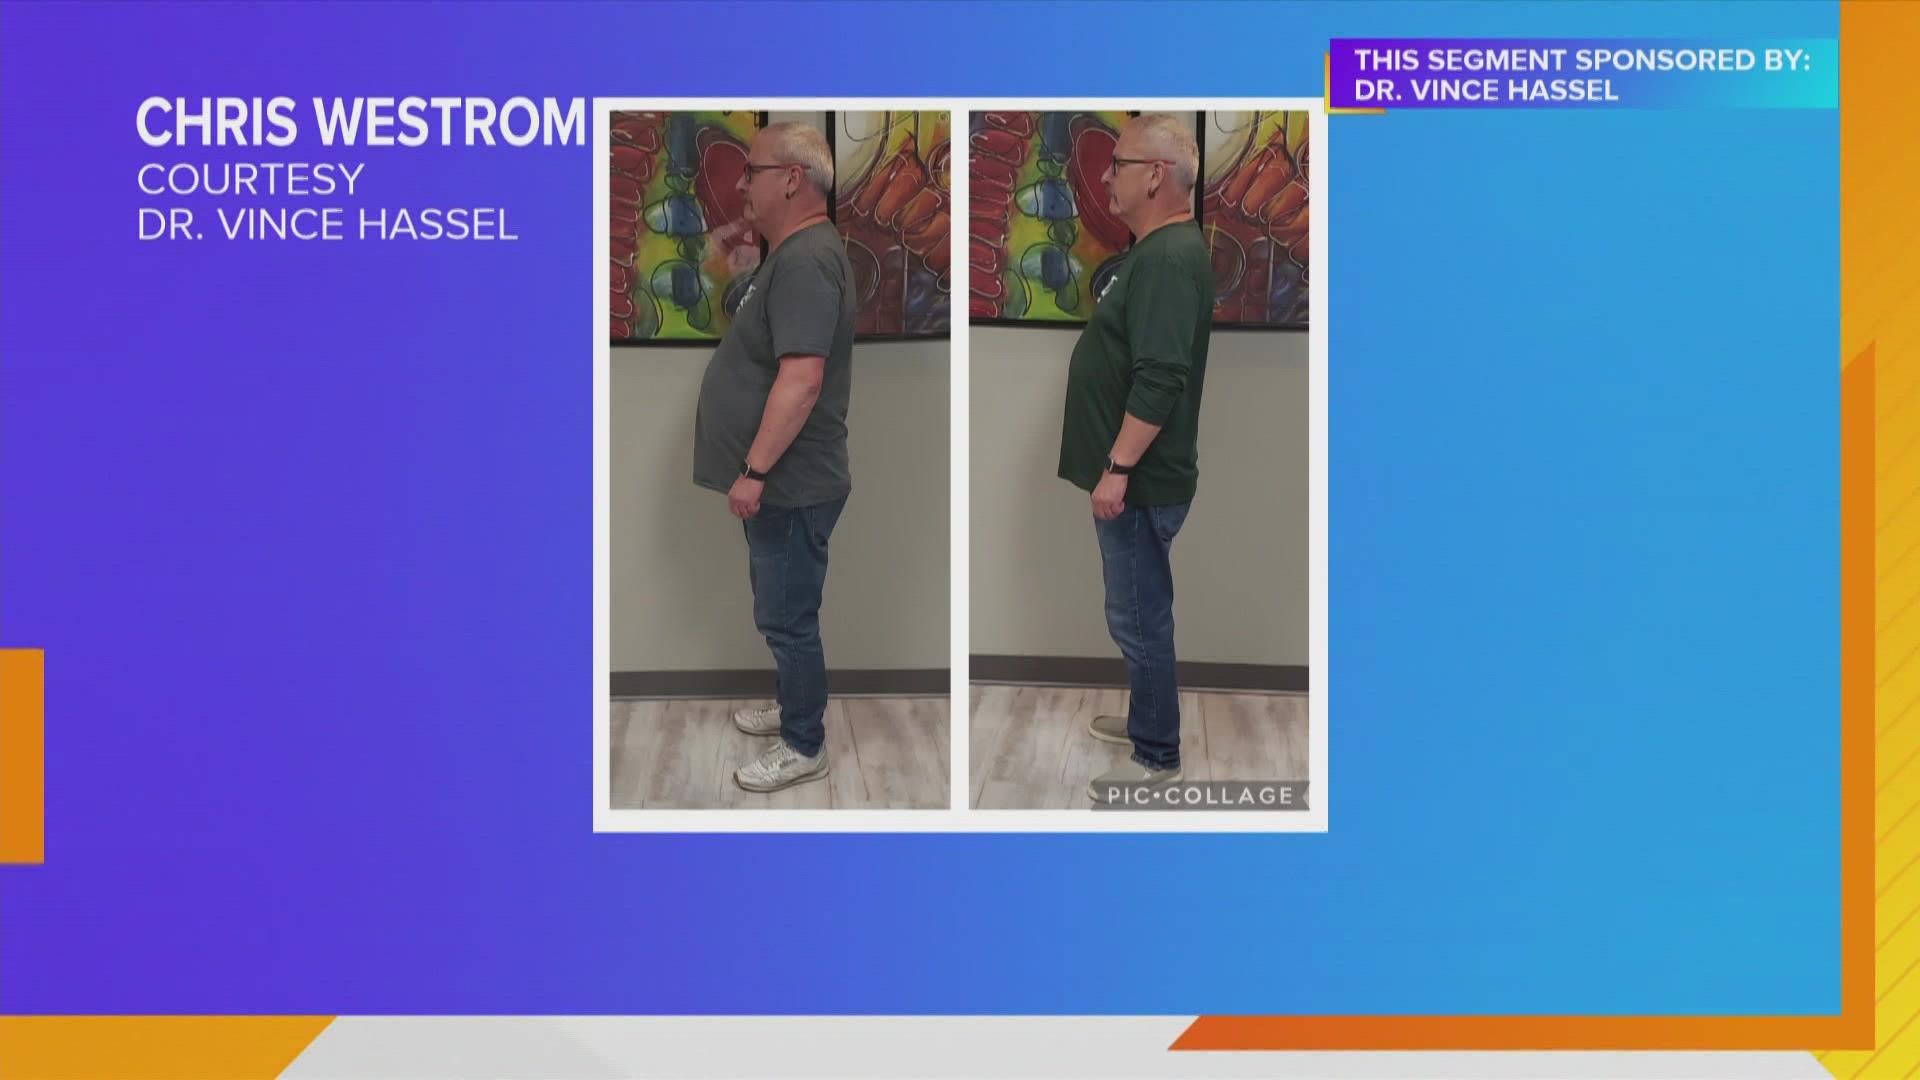 Chris Westrom threw his back out trying to tie his shoes and decided it was time to get healthy and lose weight with Dr. Hassel's ChiroThin Program | Paid Content